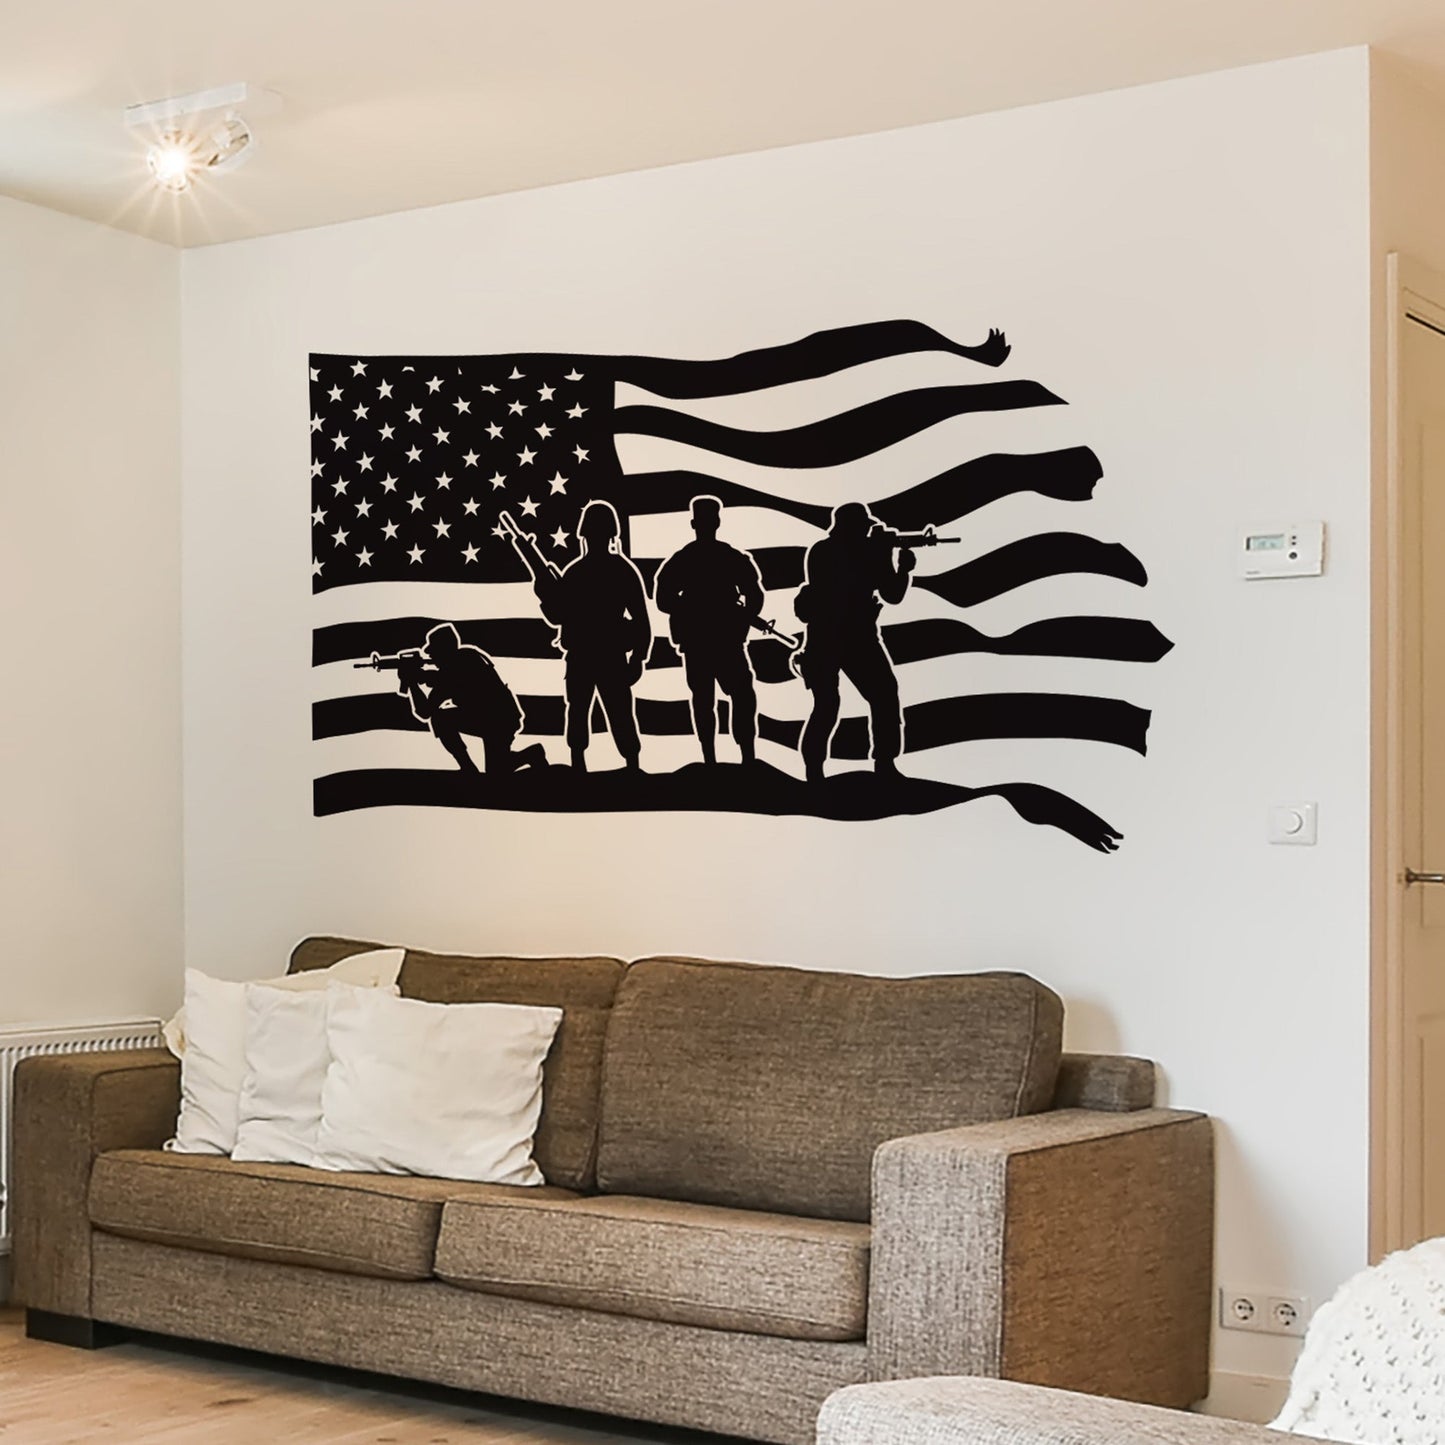 America Flag with U.S. Military Soldier Vinyl Wall Decal Sticker. #6738